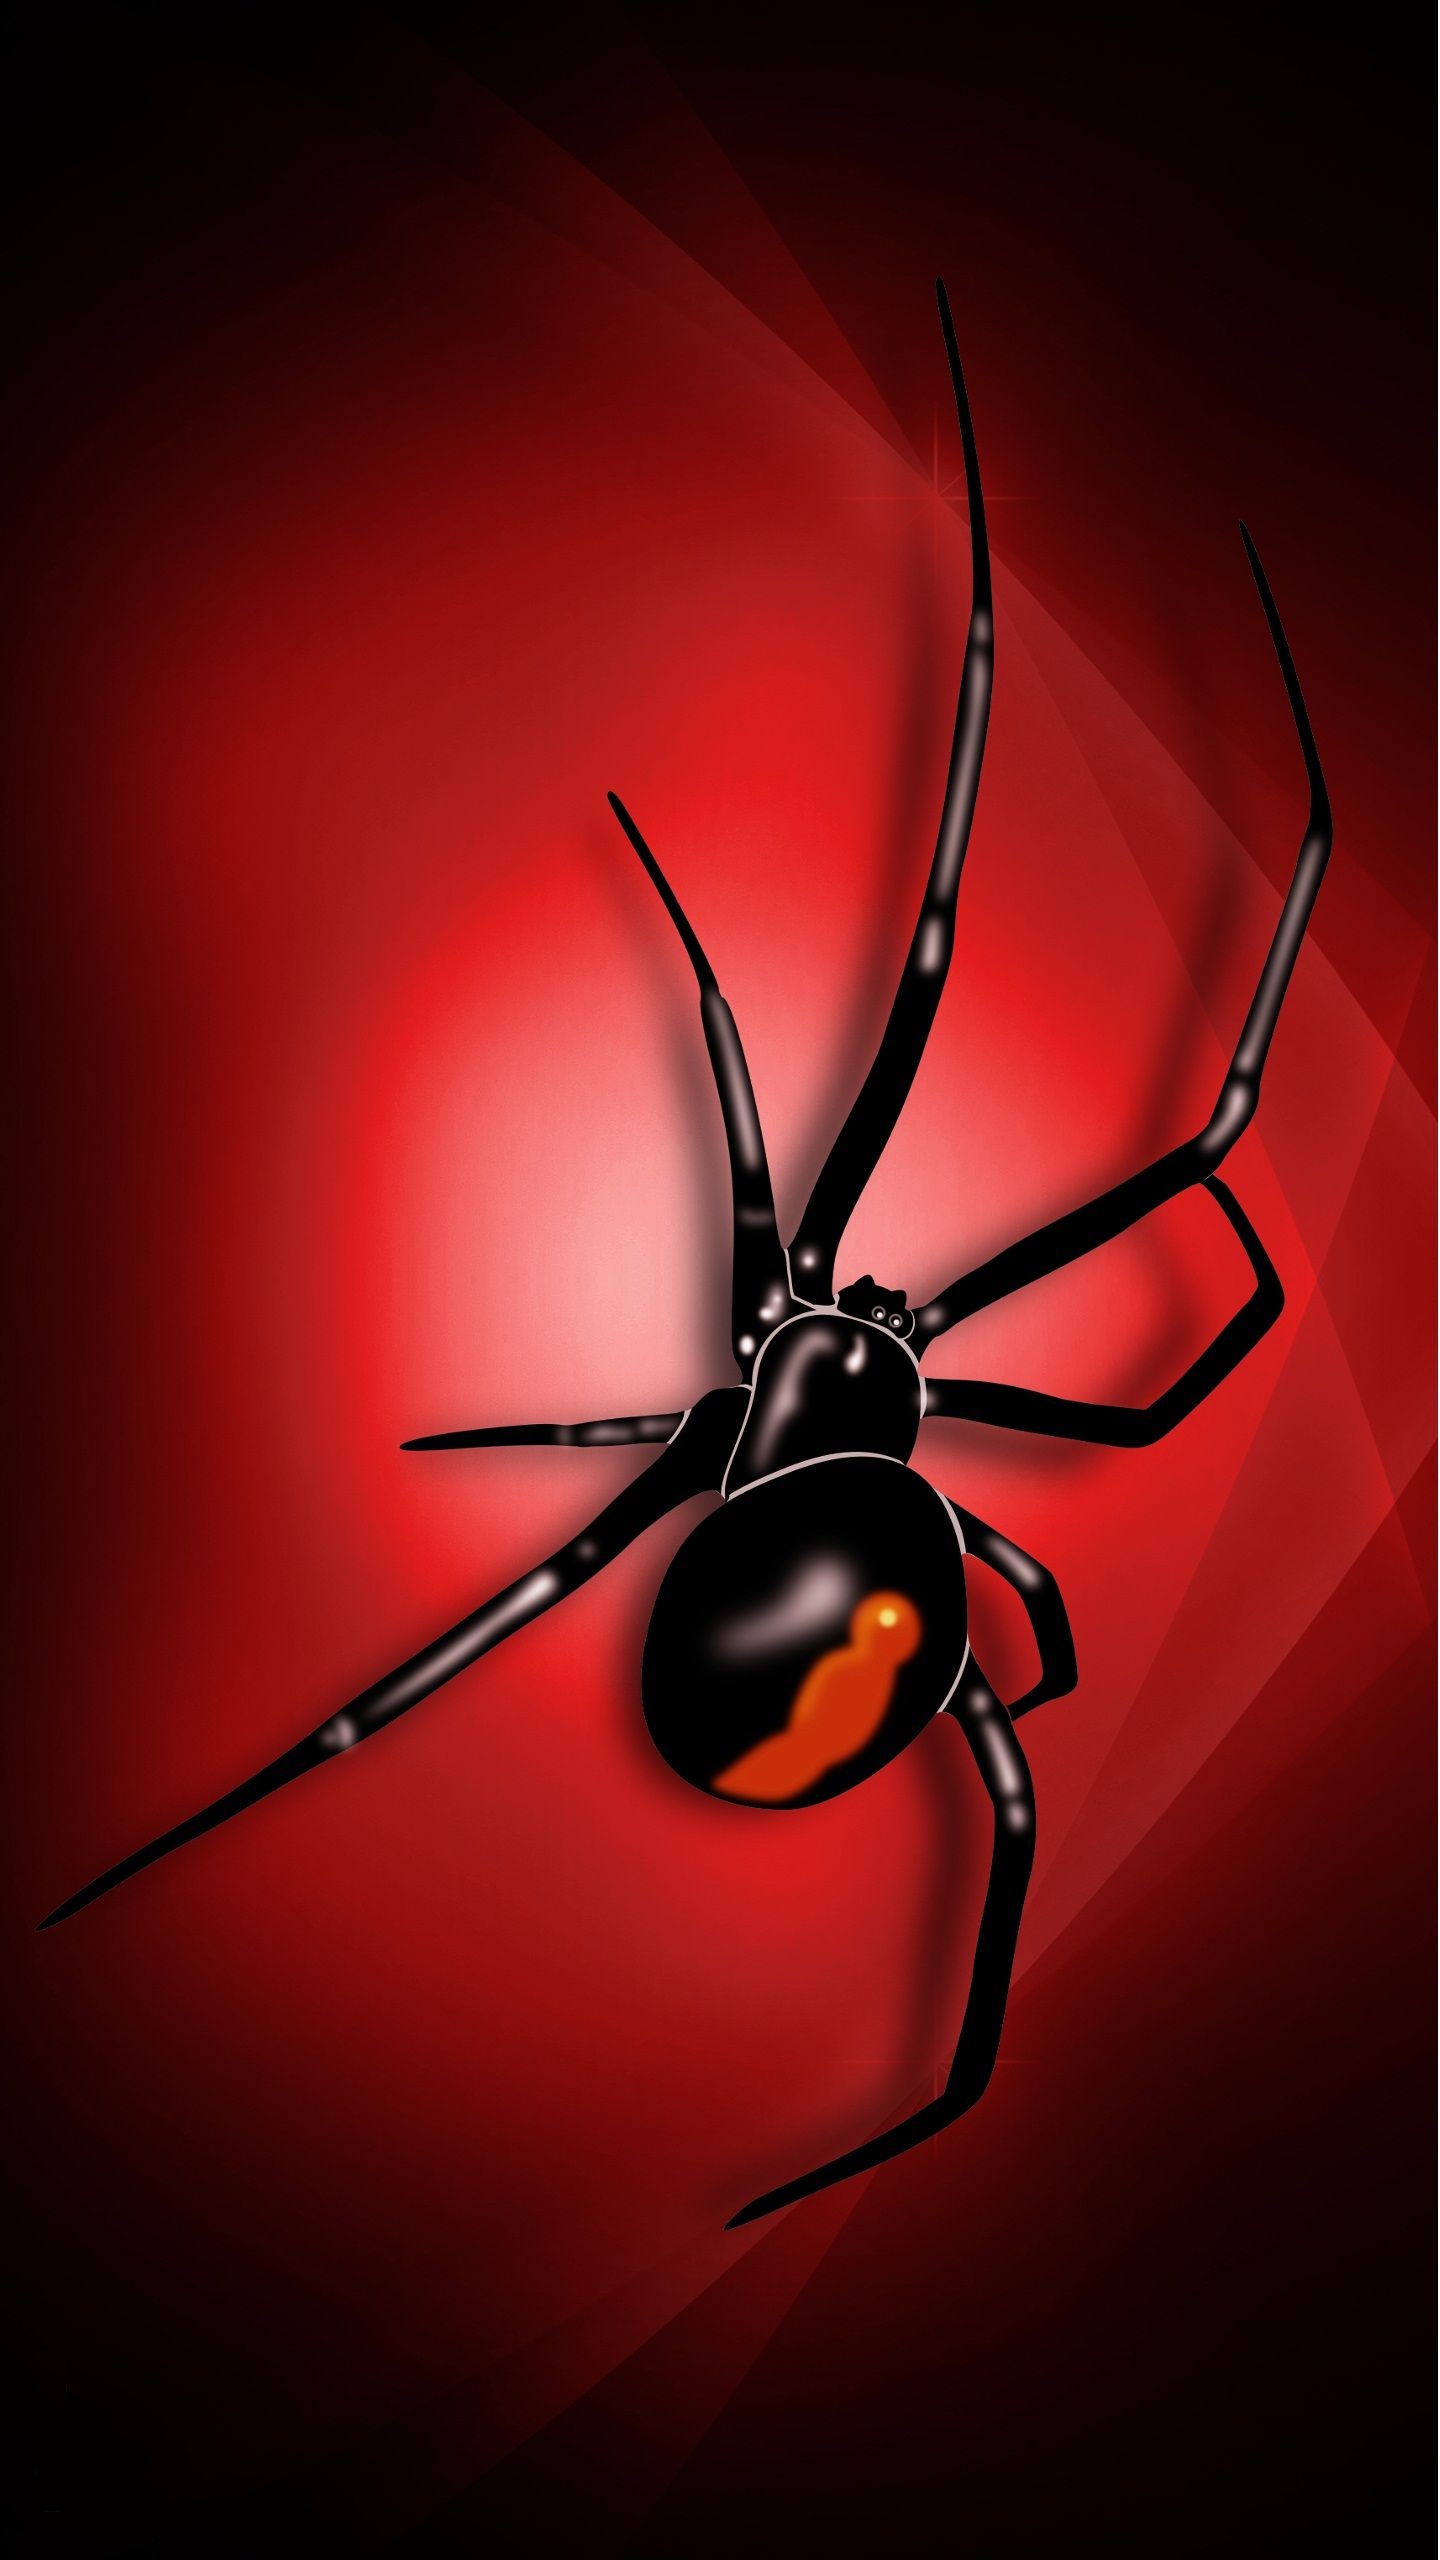 Cool spider wallpapers, Intricate patterns, Arachnid close-ups, Wall-worthy, 1440x2560 HD Phone